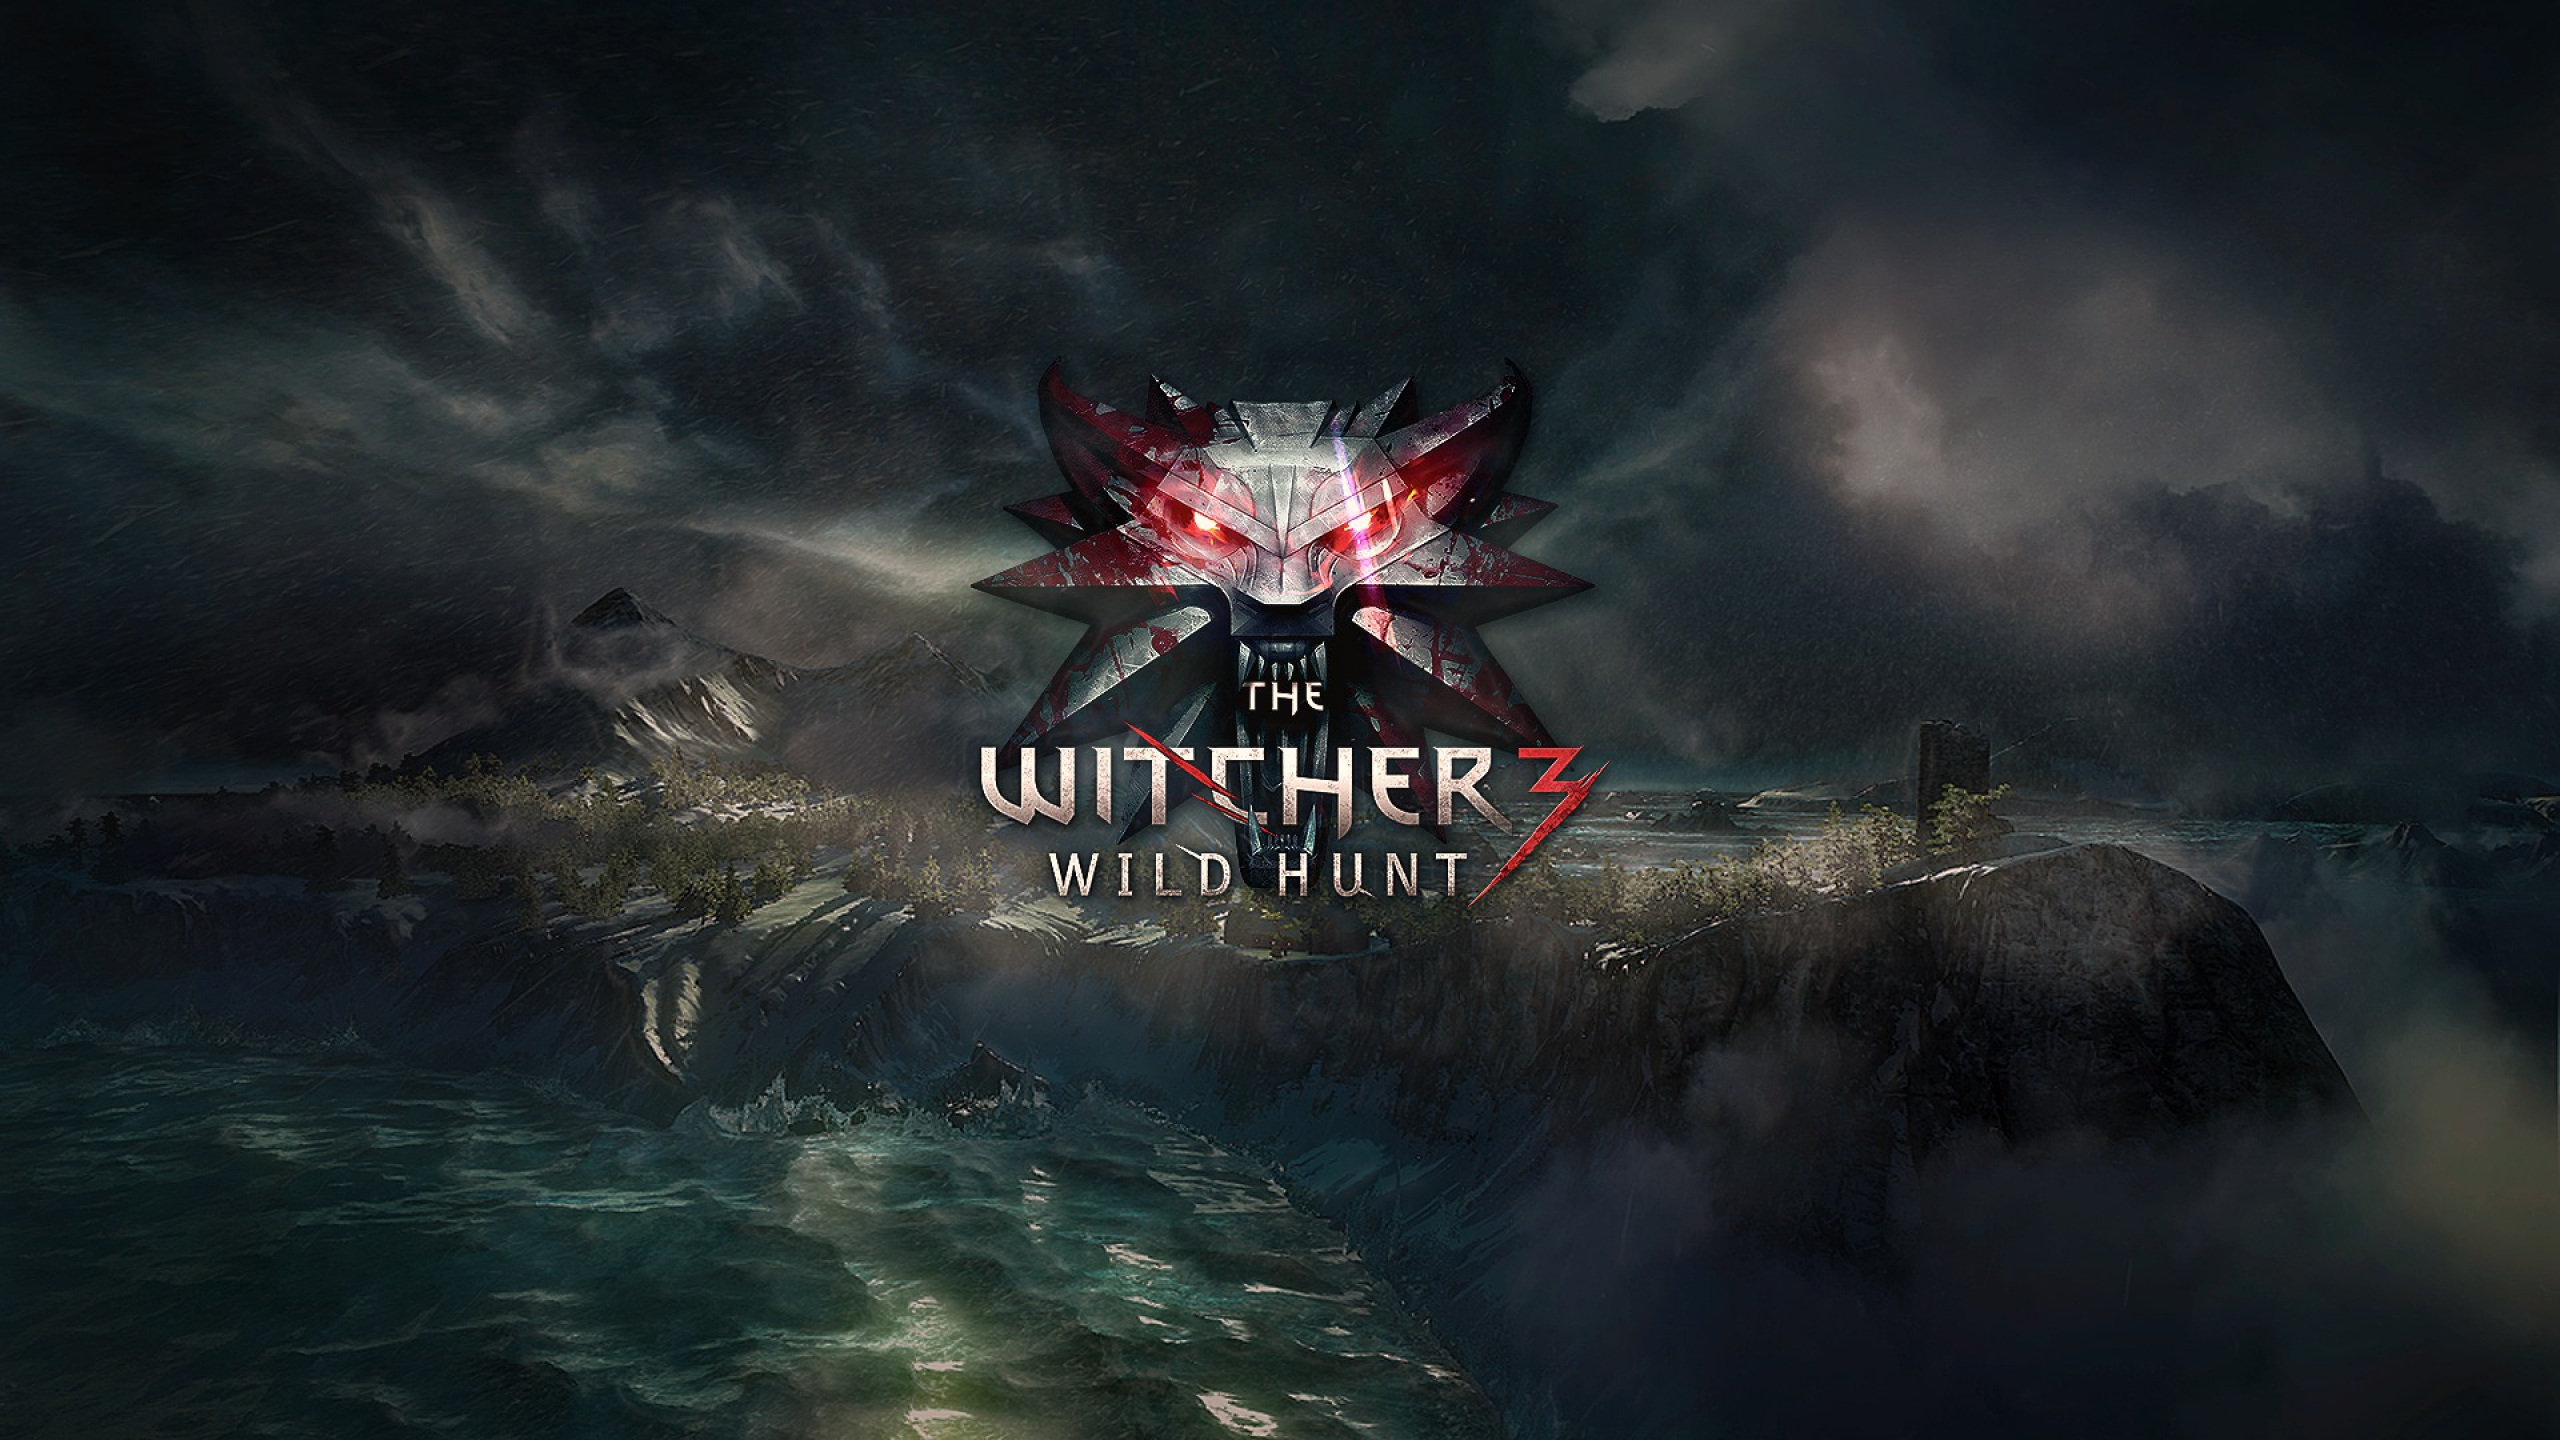 witcher logo wallpapers image 2560x1440 2560x1440